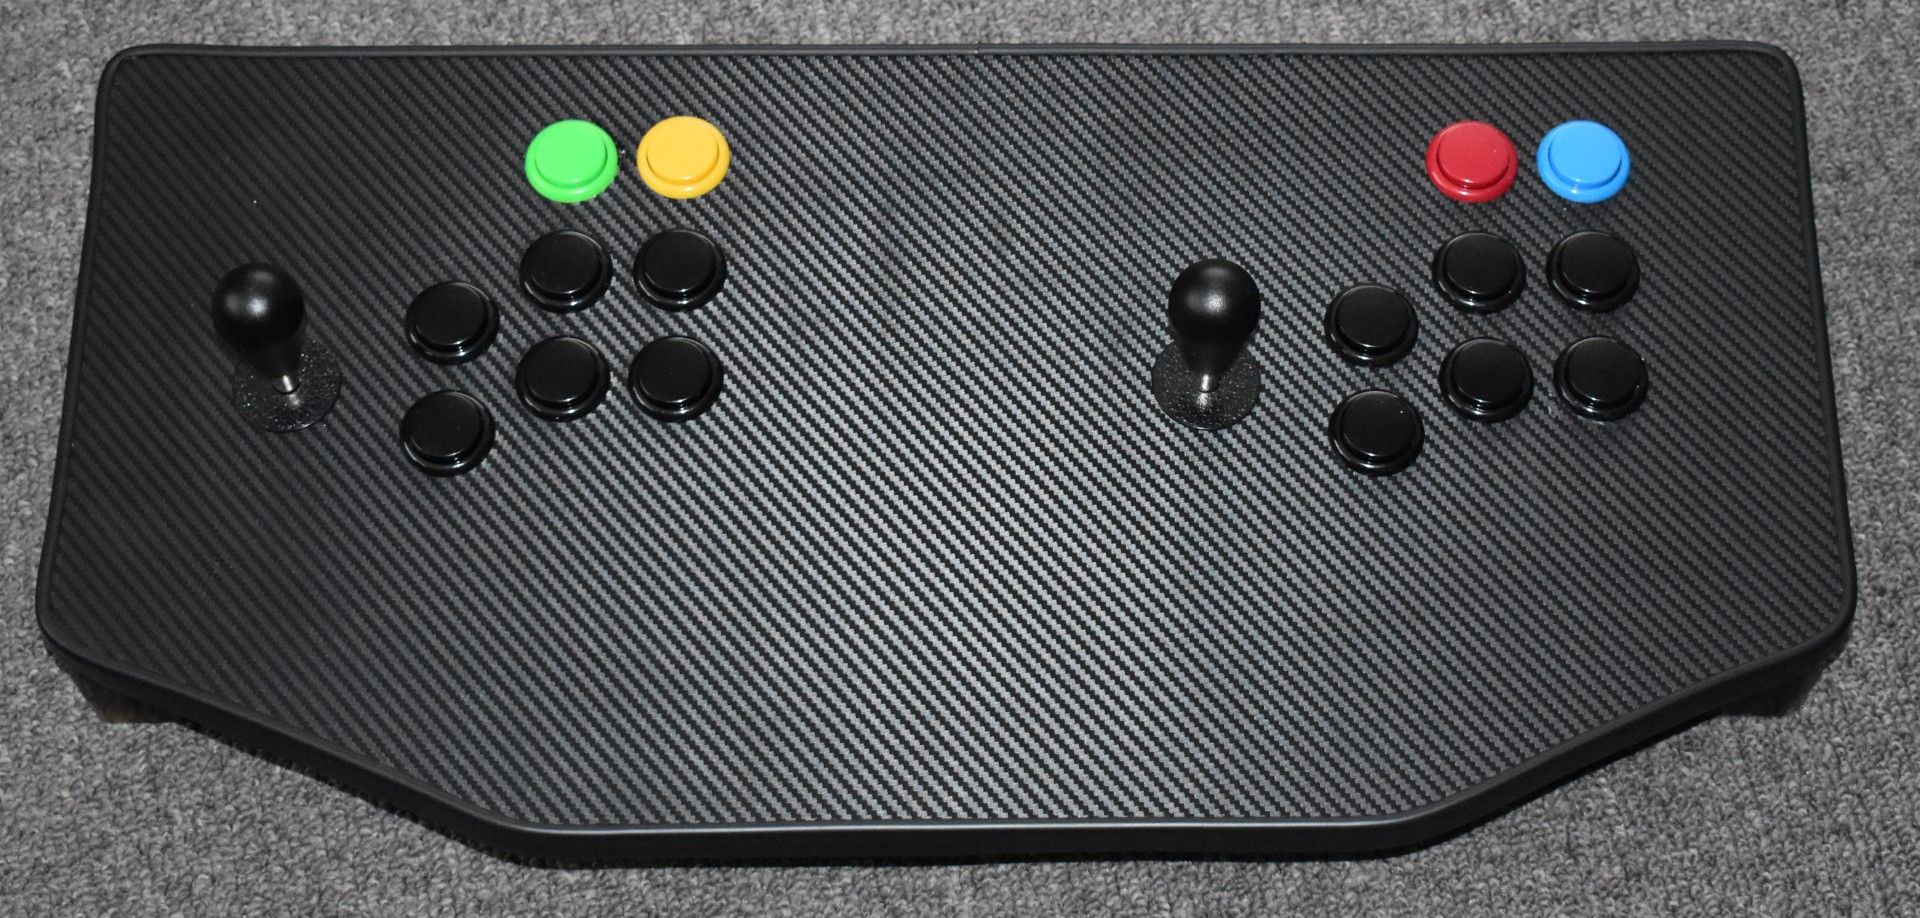 1 x Custom Two Player Arcade Control Stick - Pandoras Box With Games - NO VAT ON THE HAMMER!